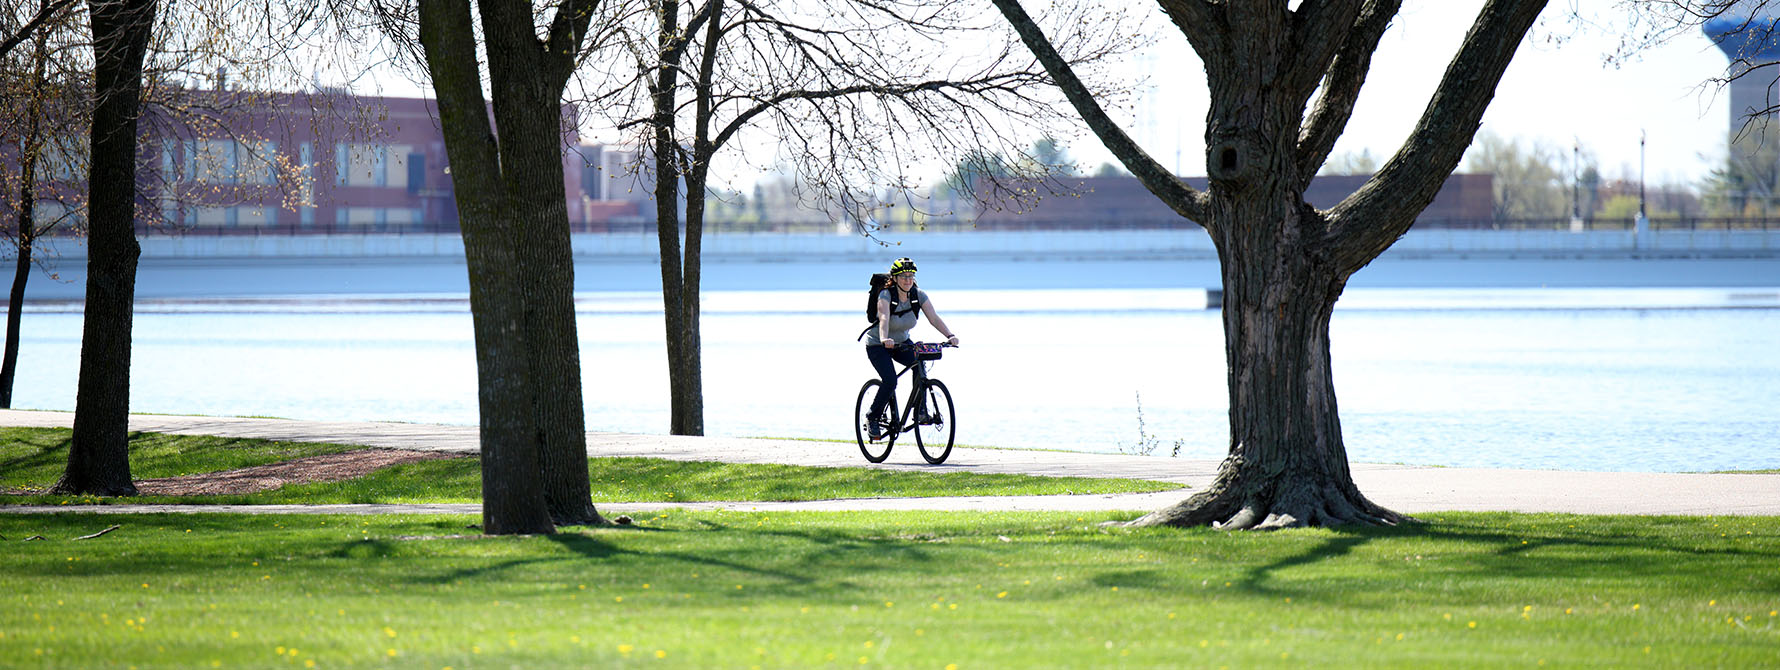 A woman commutes down a bike path along a river with a backpack on her back.